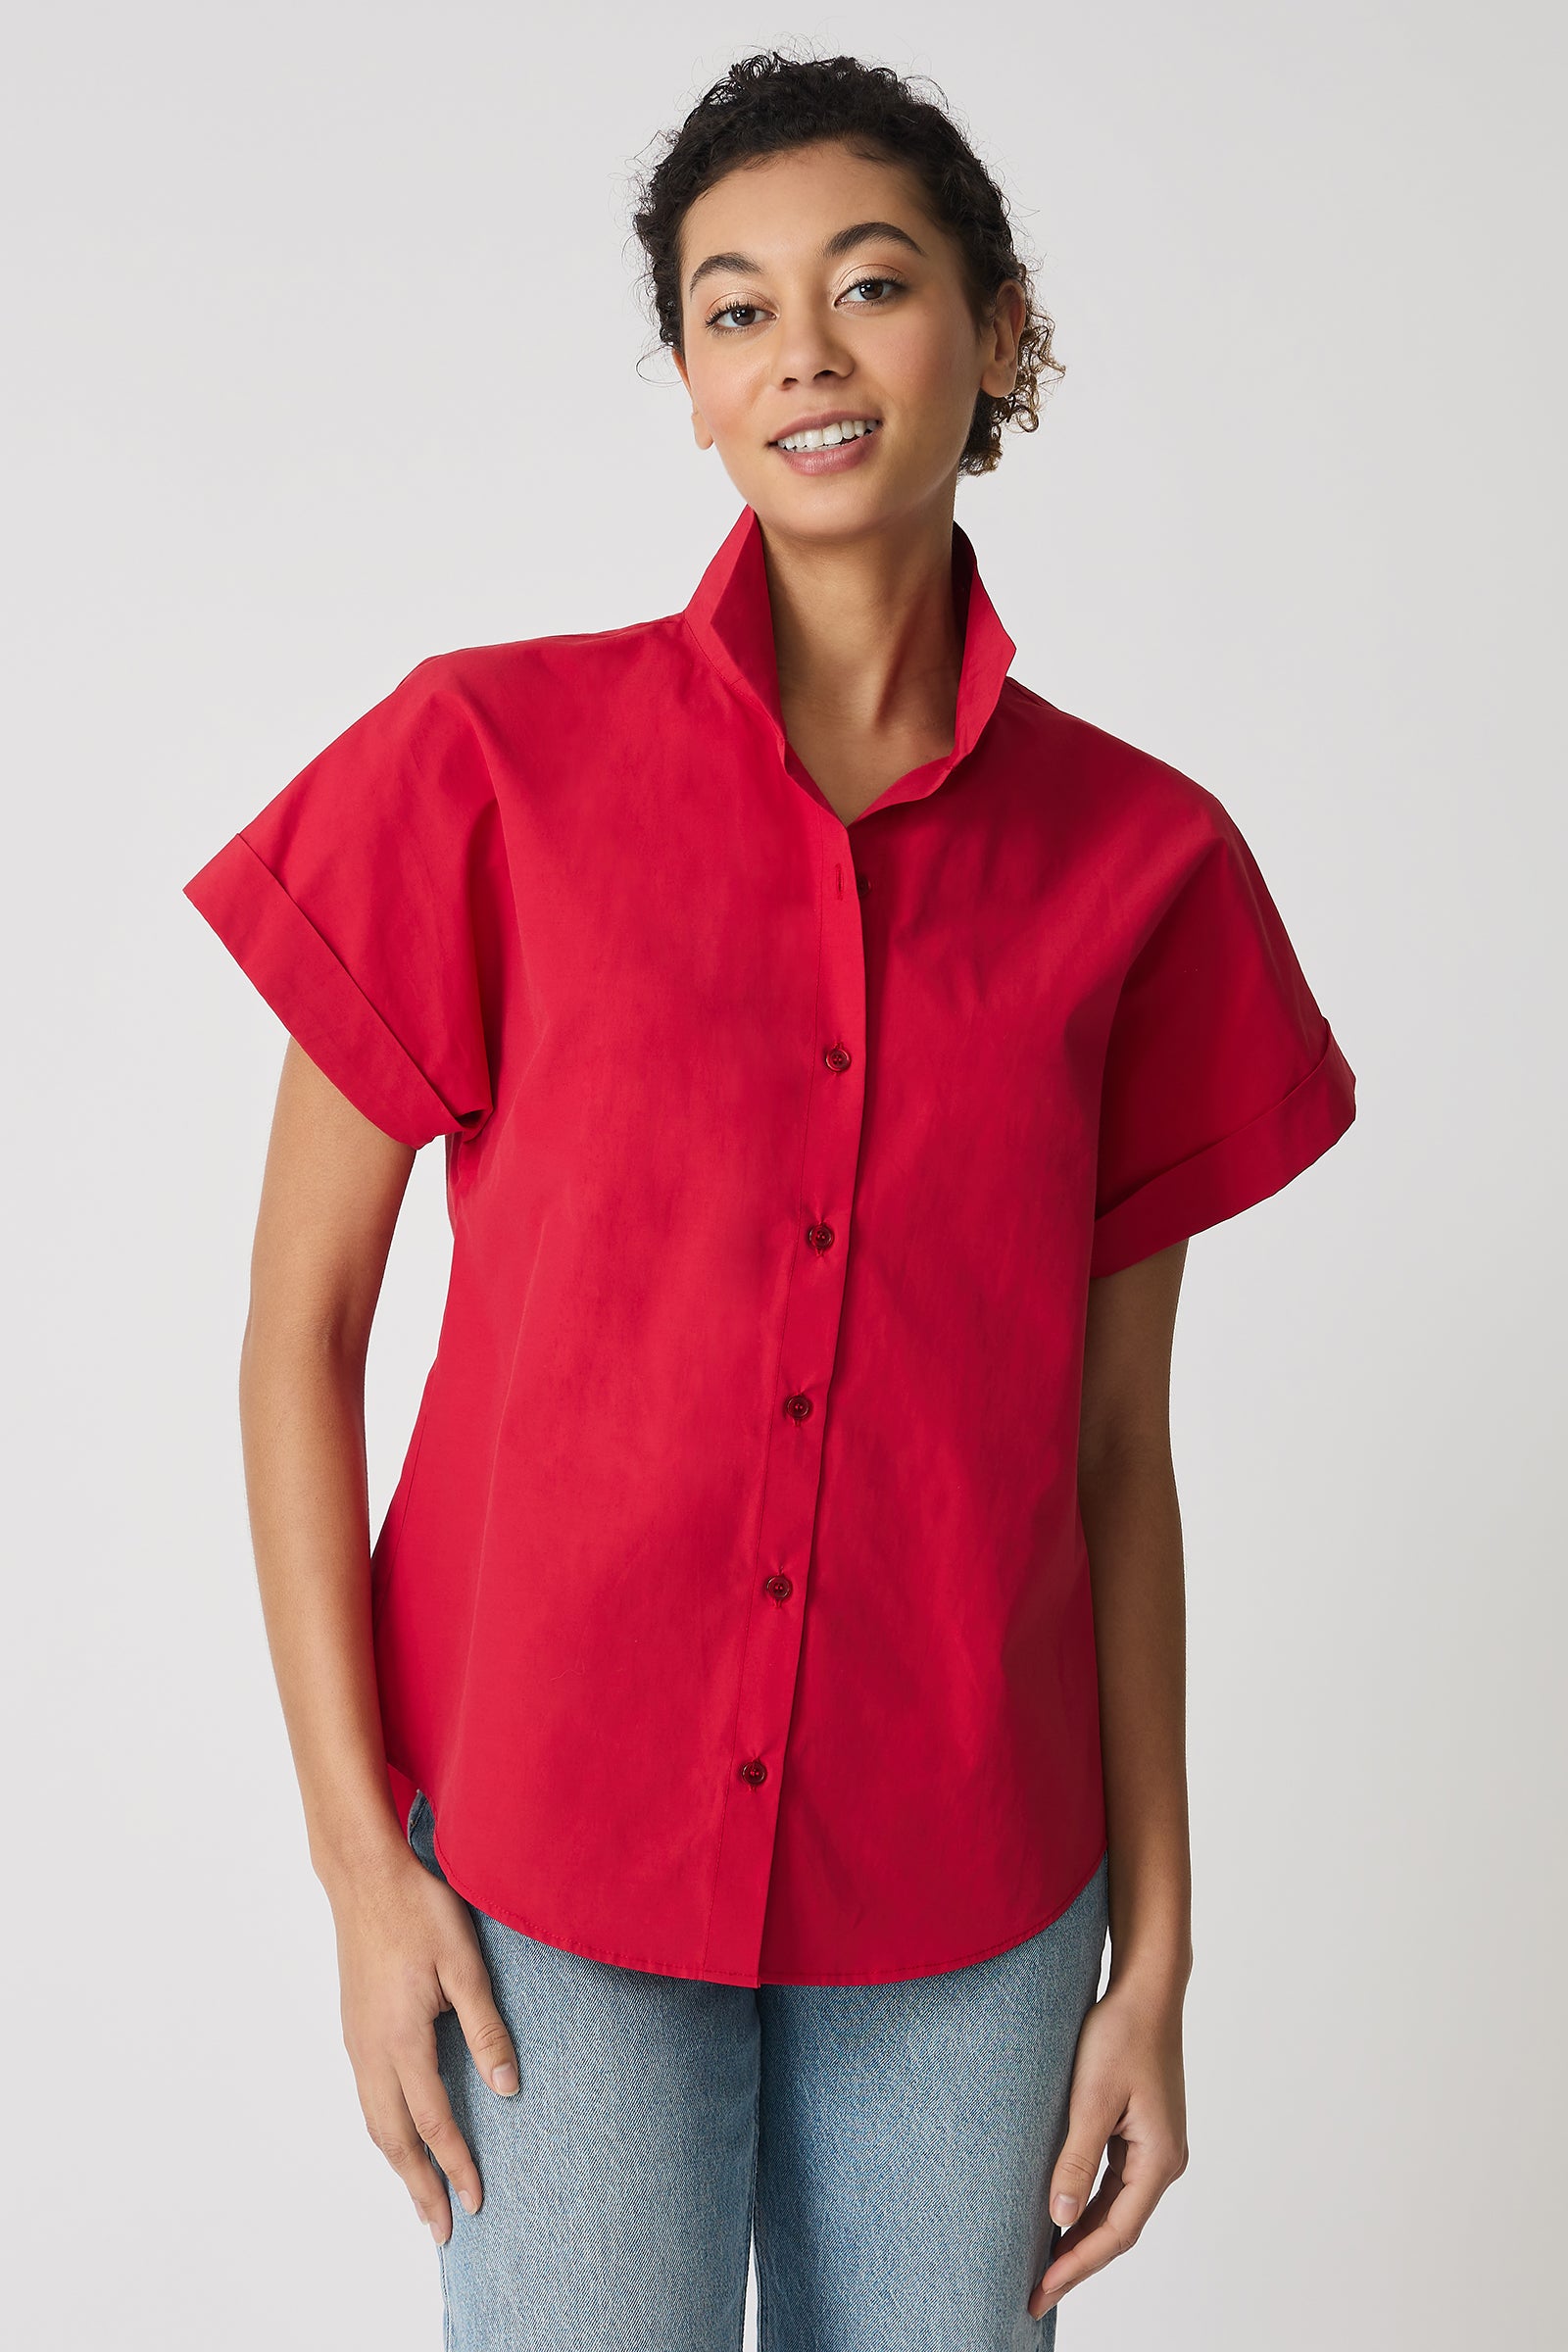 Kal Rieman Ali Kimono Top in Red on model smiling front view